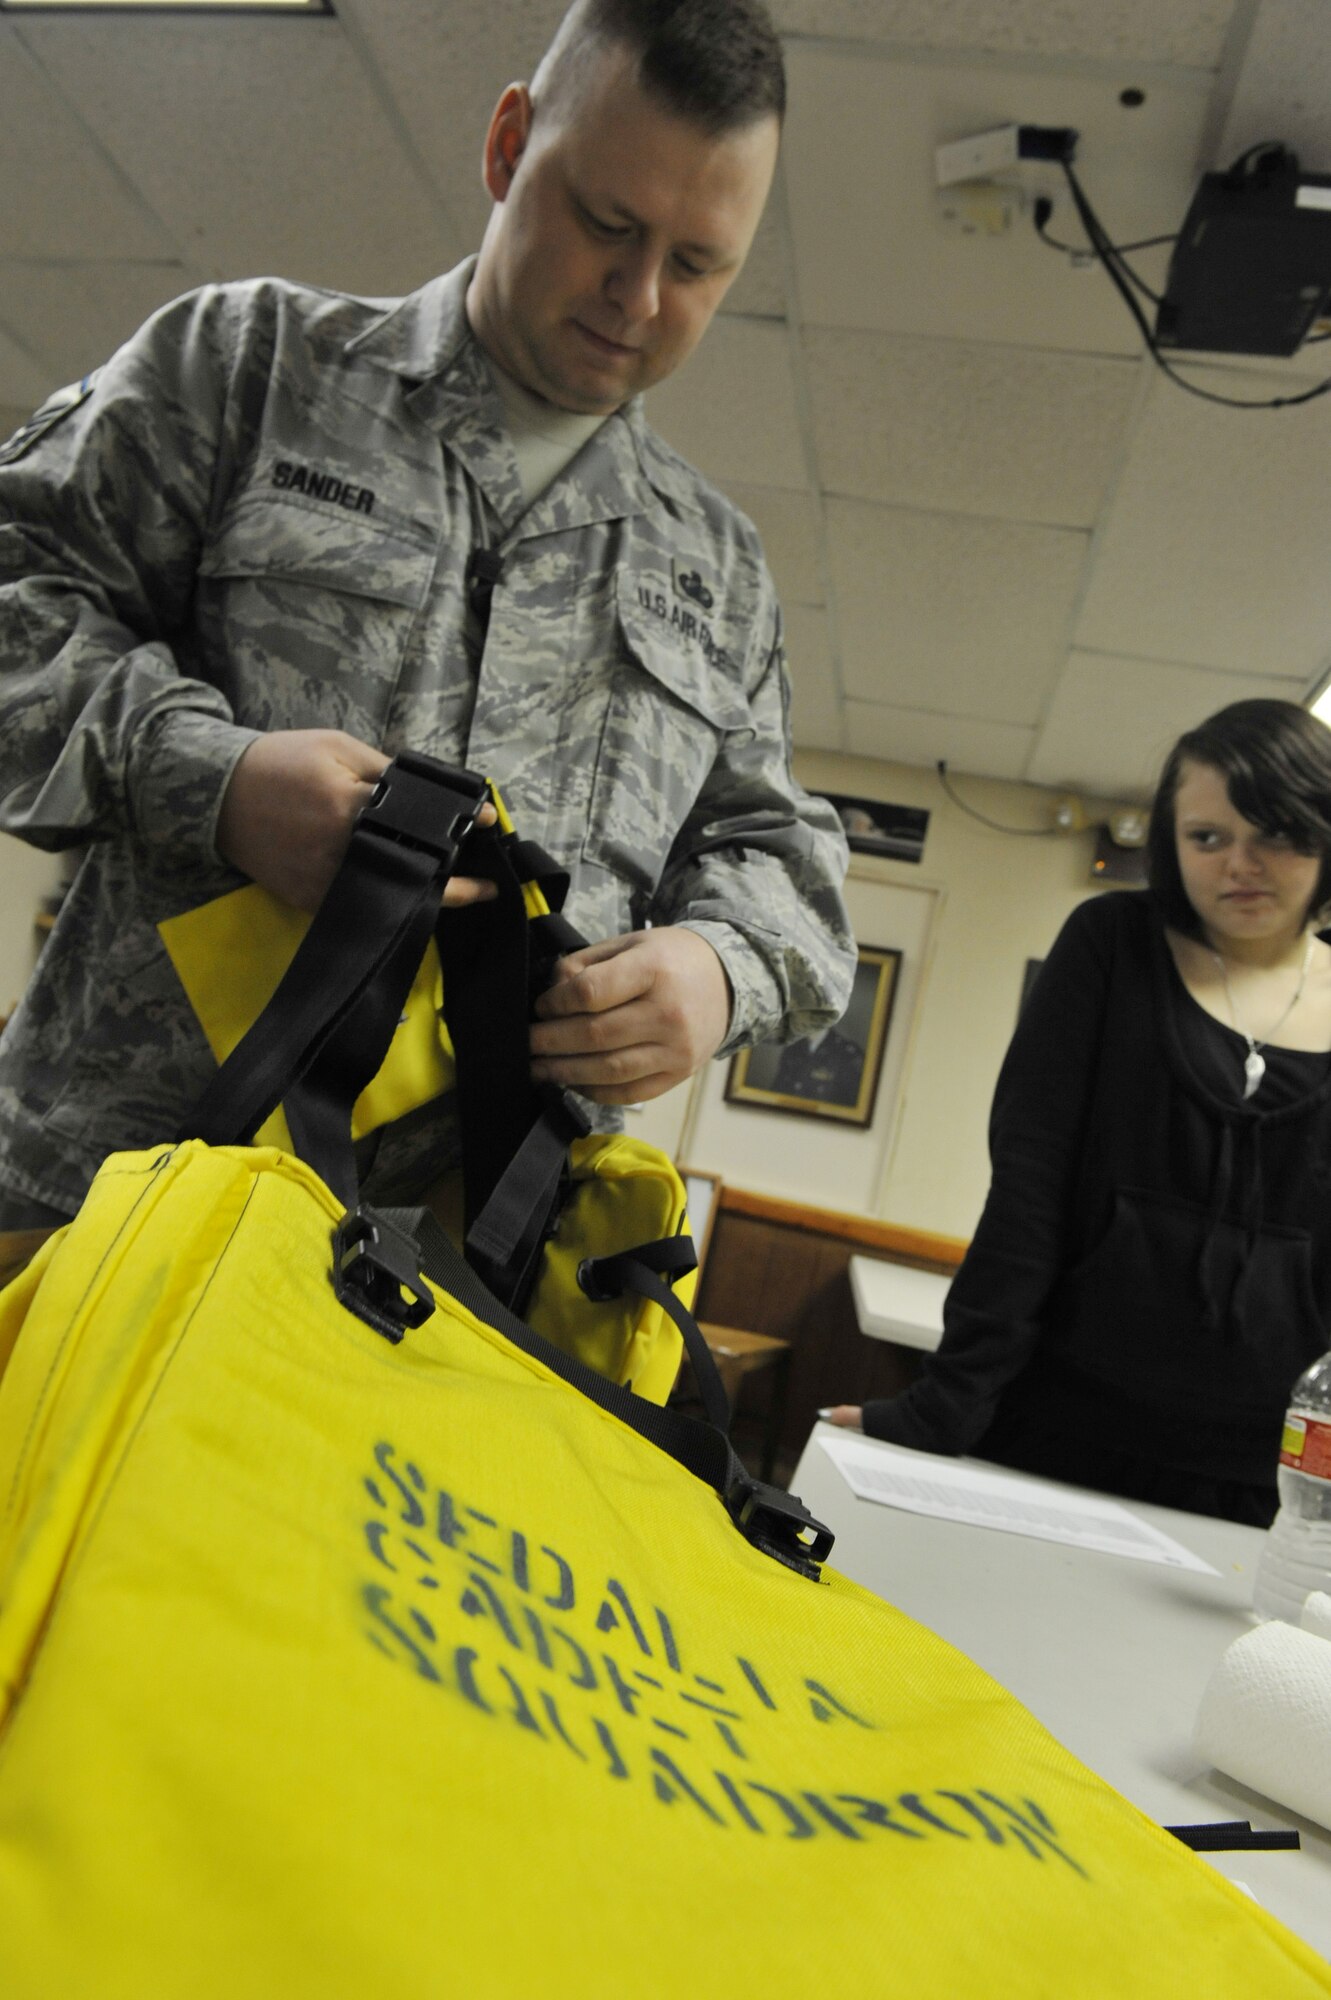 Master Sgt. William Sander, 509th Comptroller Squadron financial services superintendent, shows Cynthia, 14, how to properly prepare search and rescue equipment during a Civil Air Patrol meeting, March 28, 2013, in Sedalia, Mo. Students learn different skills to help them prepare for emergency communications and disaster relief. (U.S. Air Force photo by Heidi Hunt/Released)